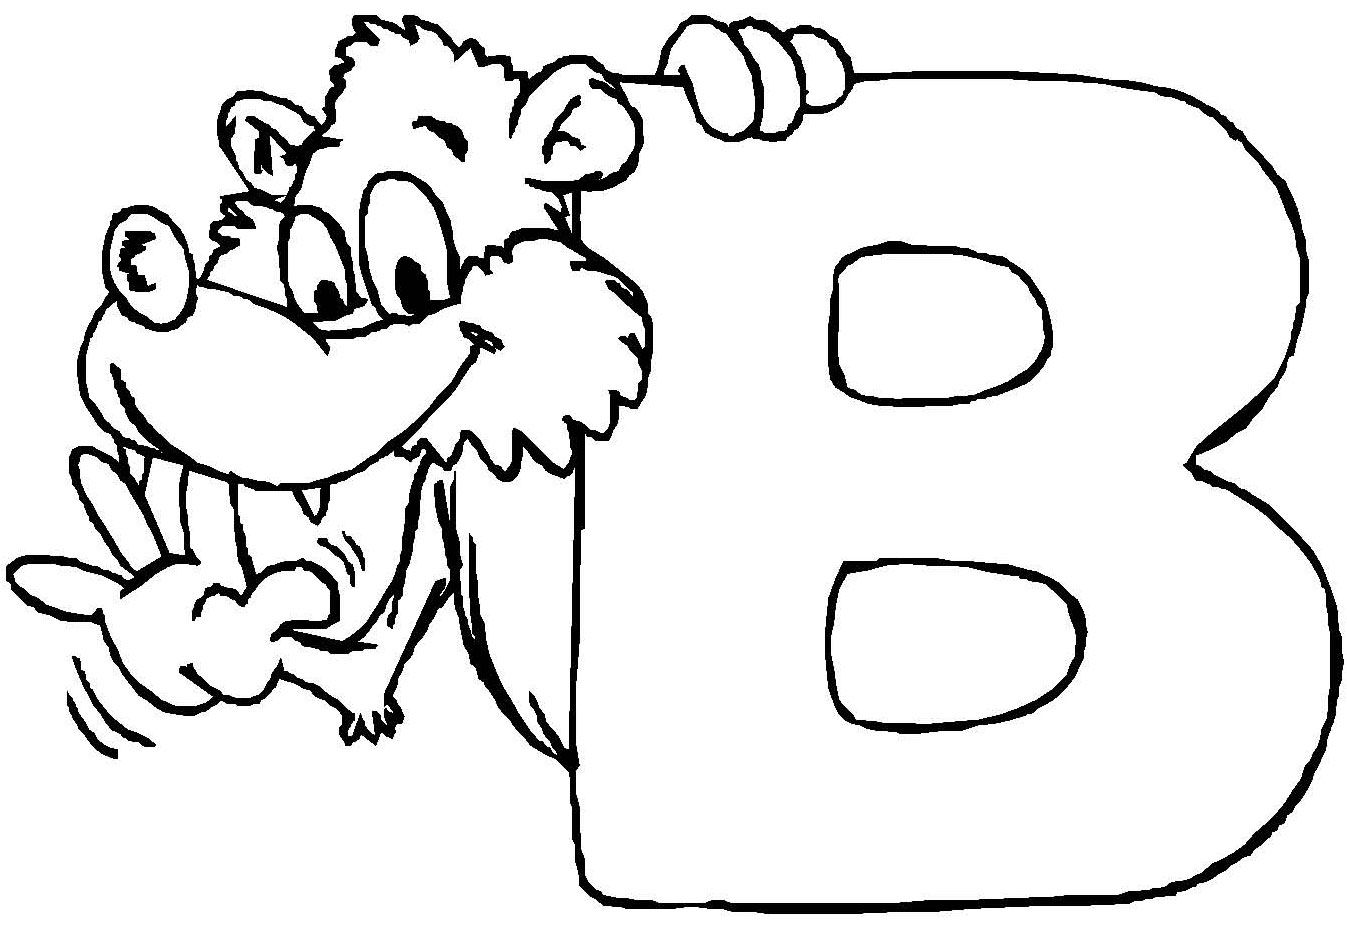 free-letter-b-printable-colouring-pages-for-preschool